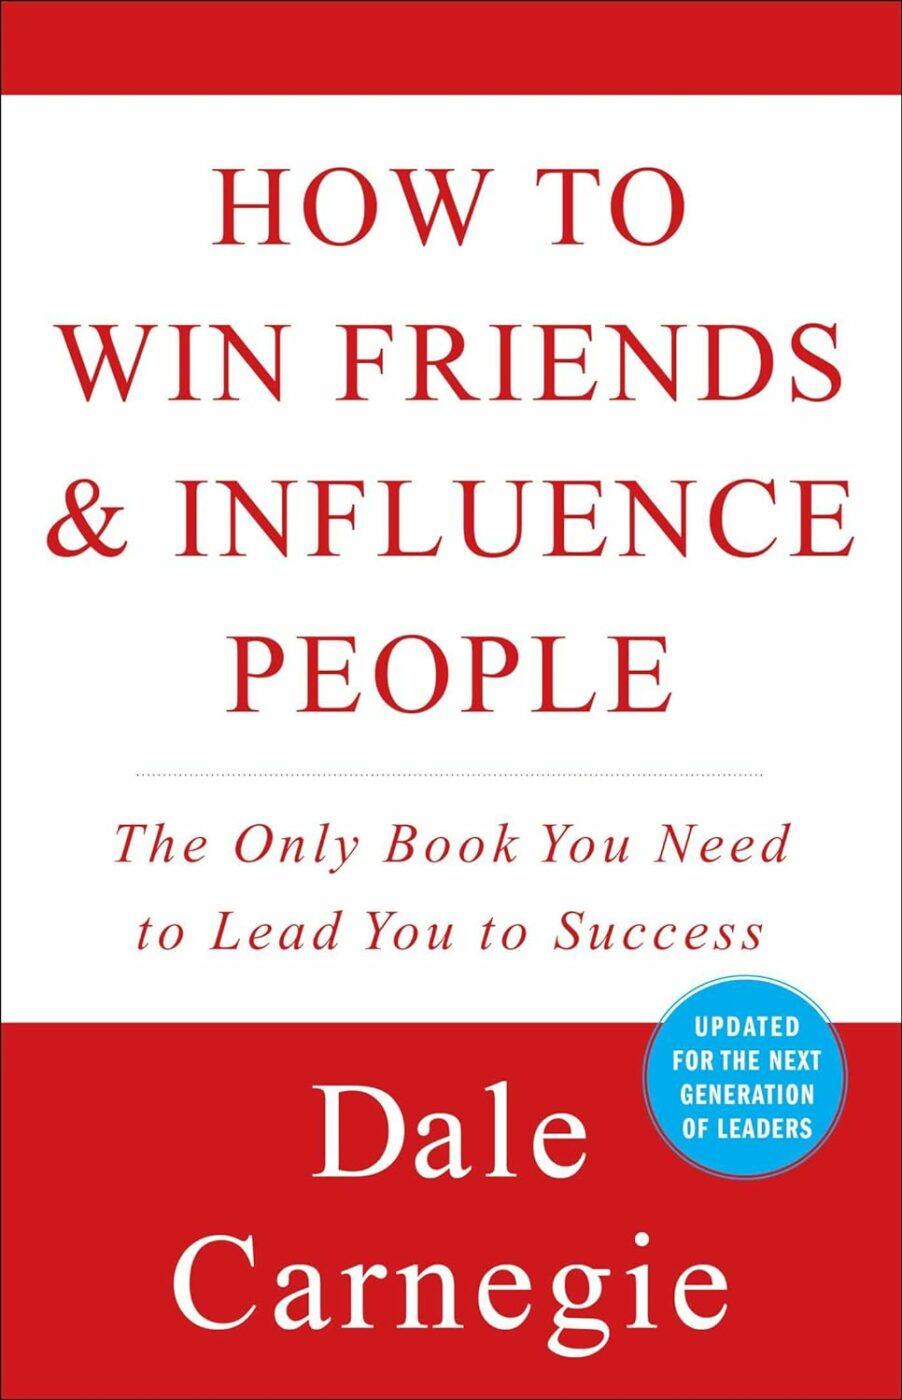 How to Win Friends and Influence People by Dale Carnegie is one of the oldest communication skills books still popular today